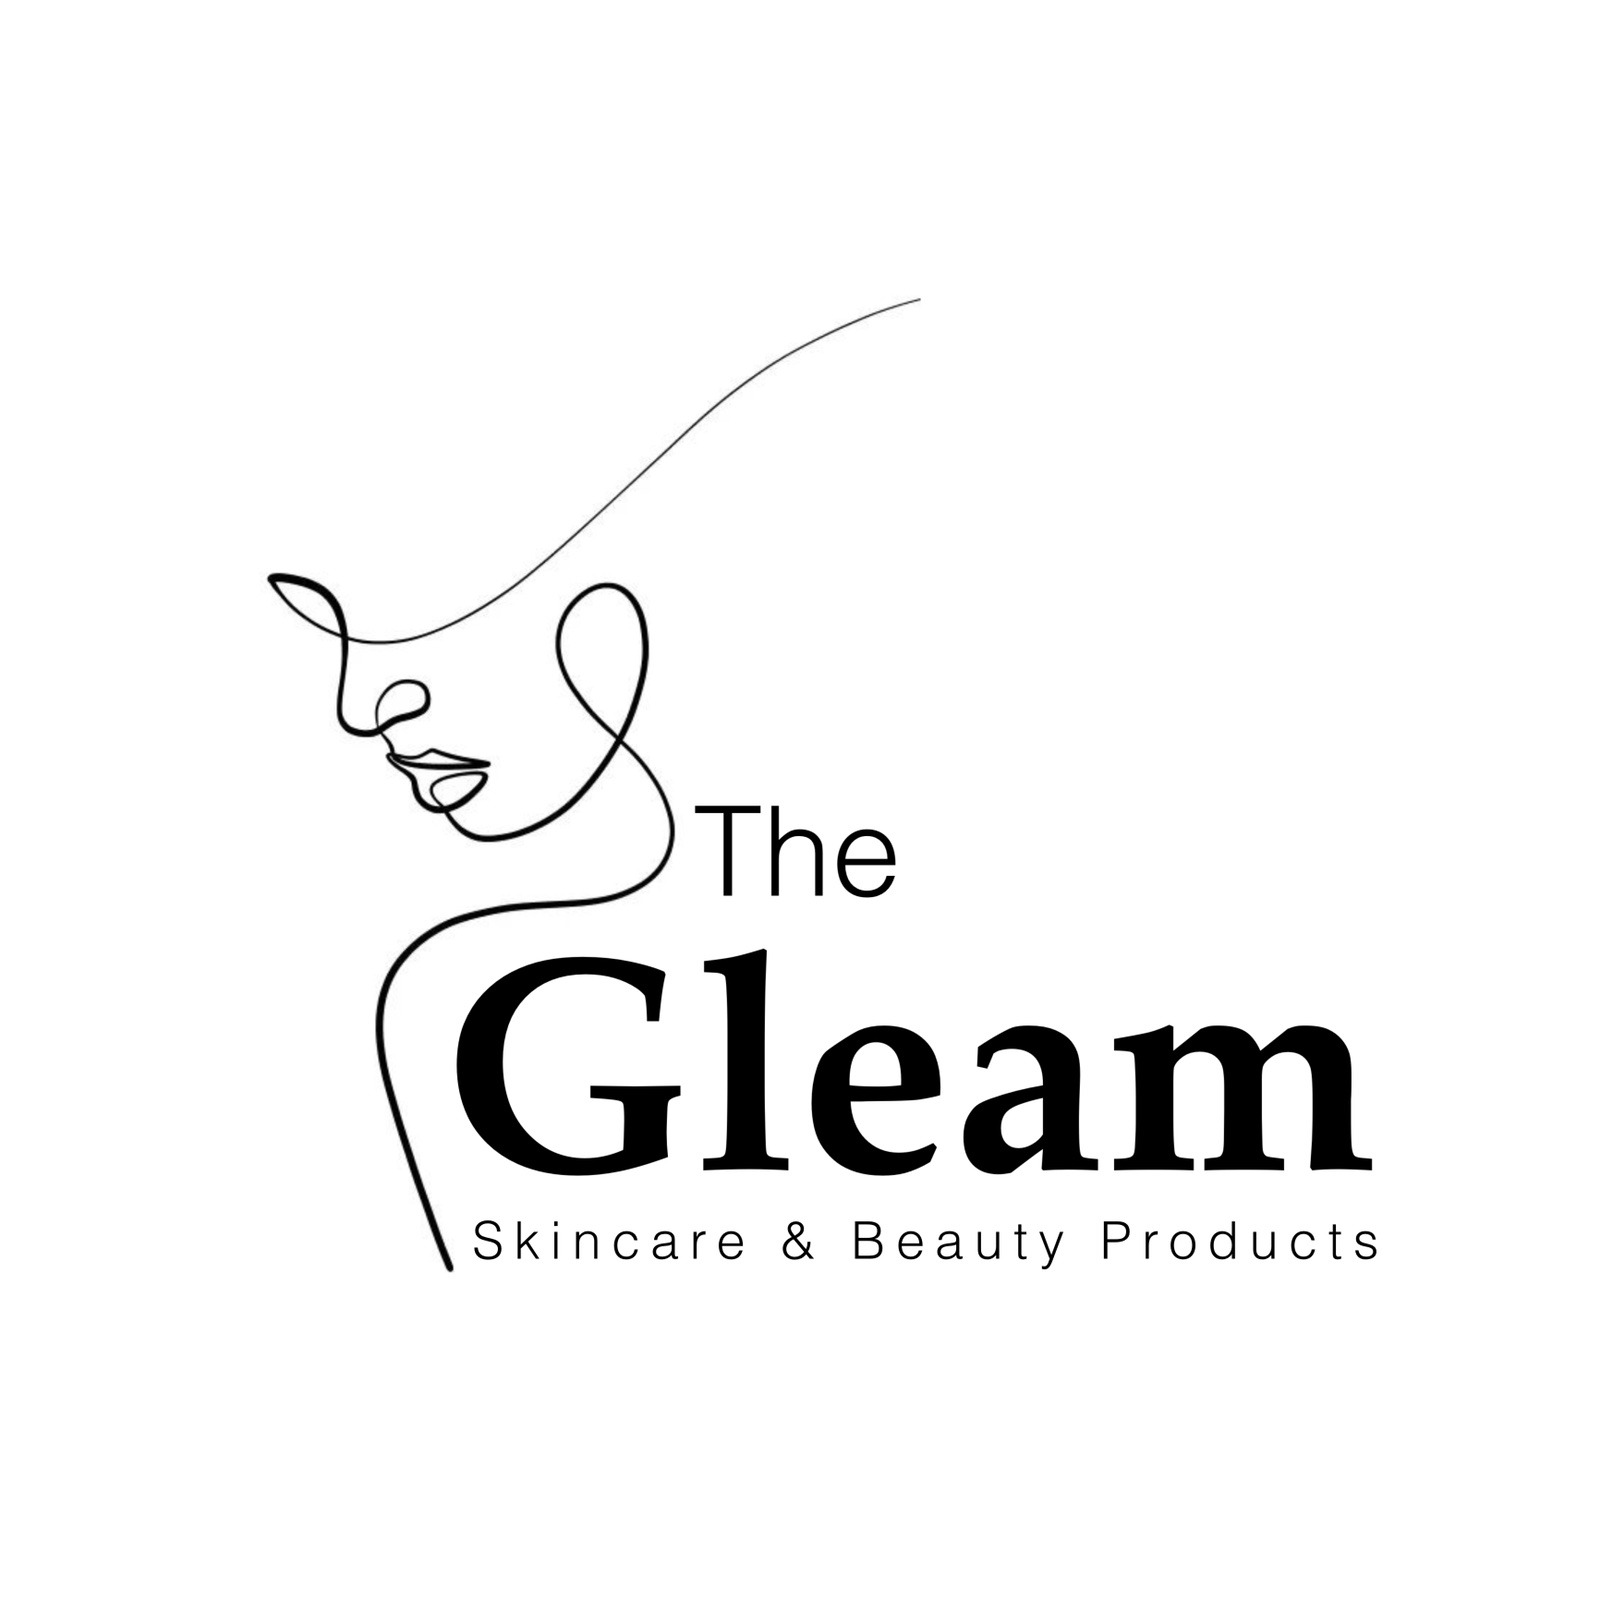 Shop online with The Gleam now! Visit The Gleam on Lazada.